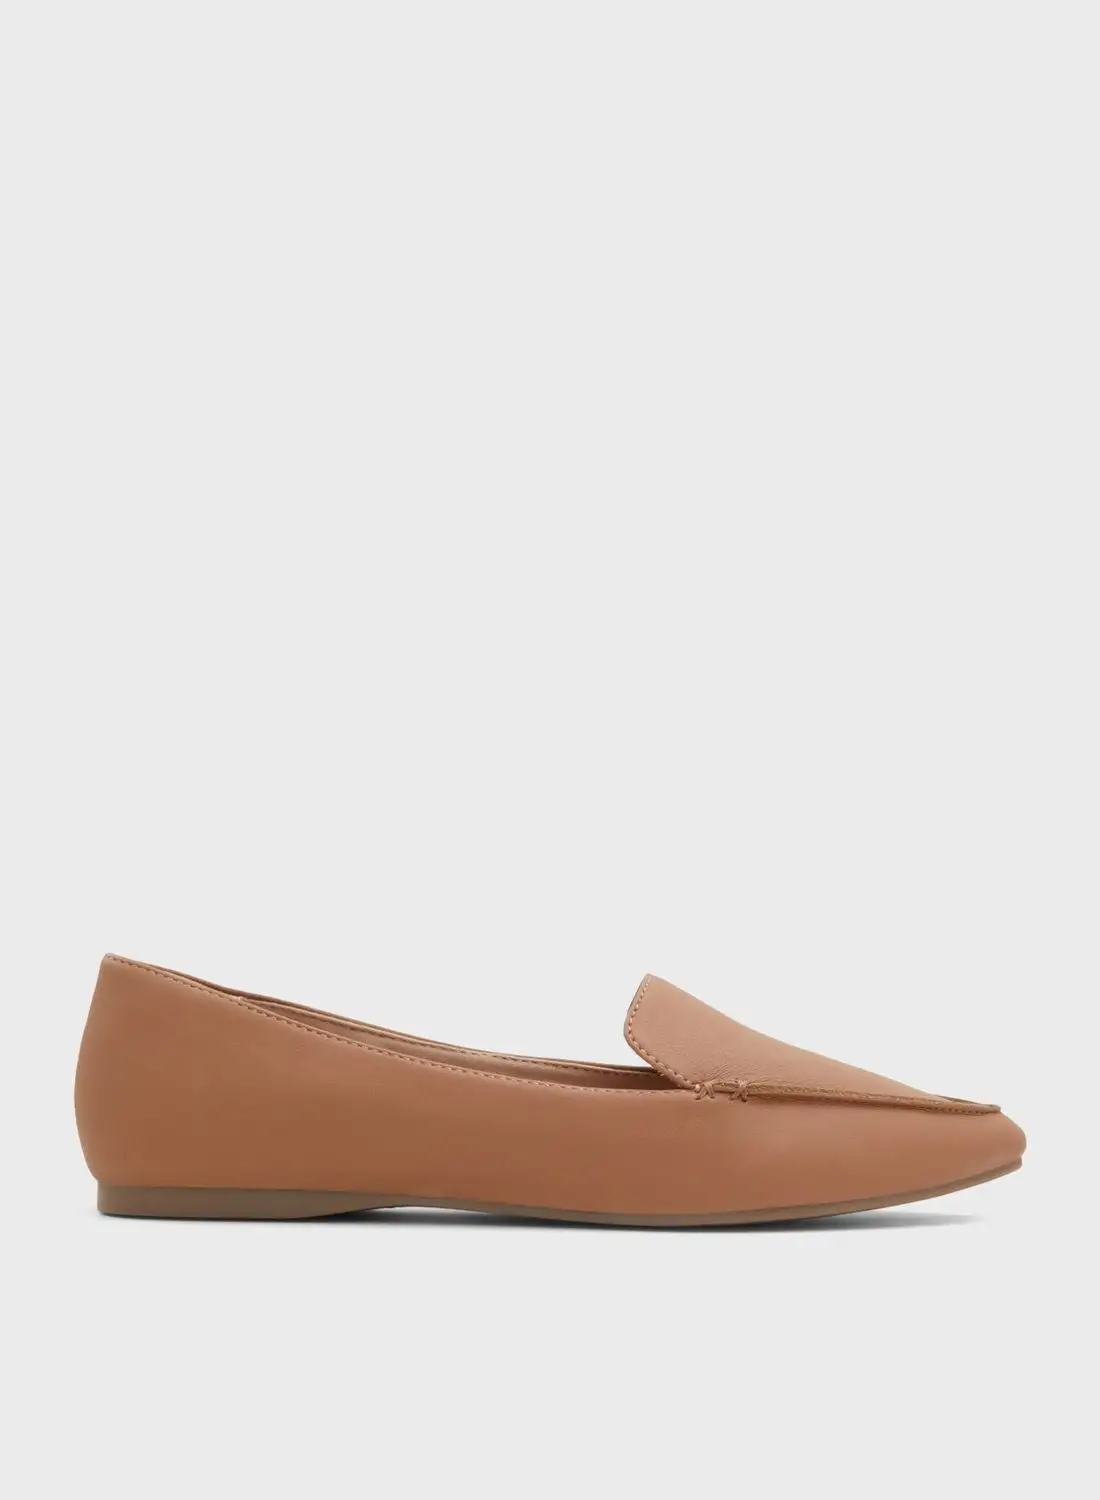 CALL IT SPRING Clairee Flat Moccasins